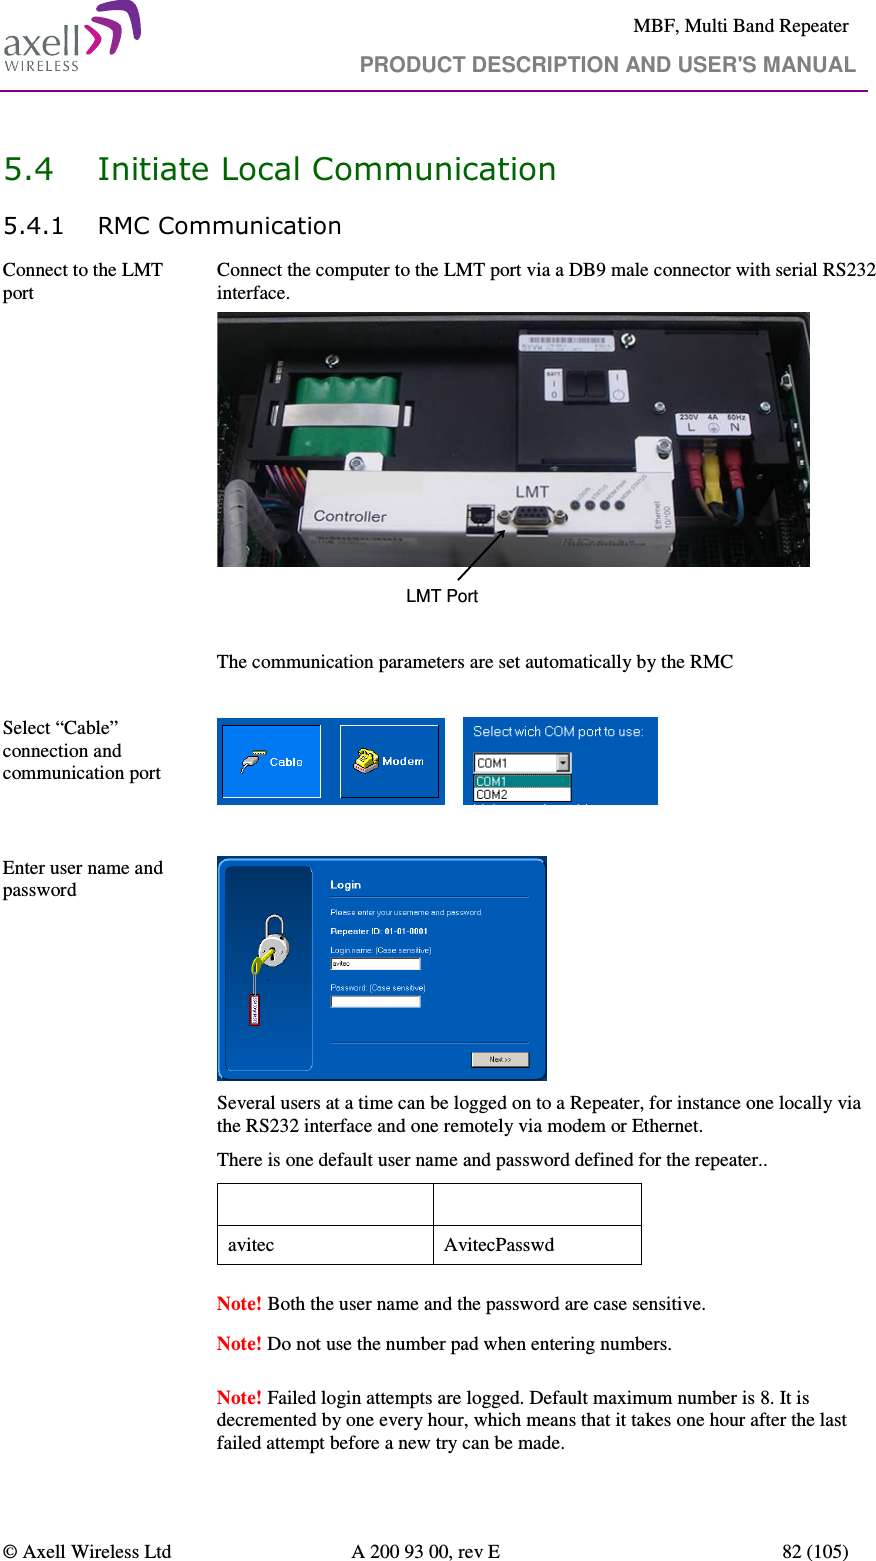     MBF, Multi Band Repeater                                     PRODUCT DESCRIPTION AND USER&apos;S MANUAL   © Axell Wireless Ltd  A 200 93 00, rev E  82 (105)  5.4 Initiate Local Communication 5.4.1 RMC Communication Connect to the LMT port  Connect the computer to the LMT port via a DB9 male connector with serial RS232 interface.  LMT Port  The communication parameters are set automatically by the RMC  Select “Cable” connection and communication port         Enter user name and password     Several users at a time can be logged on to a Repeater, for instance one locally via the RS232 interface and one remotely via modem or Ethernet.  There is one default user name and password defined for the repeater.. User Name  Password avitec  AvitecPasswd  Note! Both the user name and the password are case sensitive.   Note! Do not use the number pad when entering numbers.    Note! Failed login attempts are logged. Default maximum number is 8. It is decremented by one every hour, which means that it takes one hour after the last failed attempt before a new try can be made. 